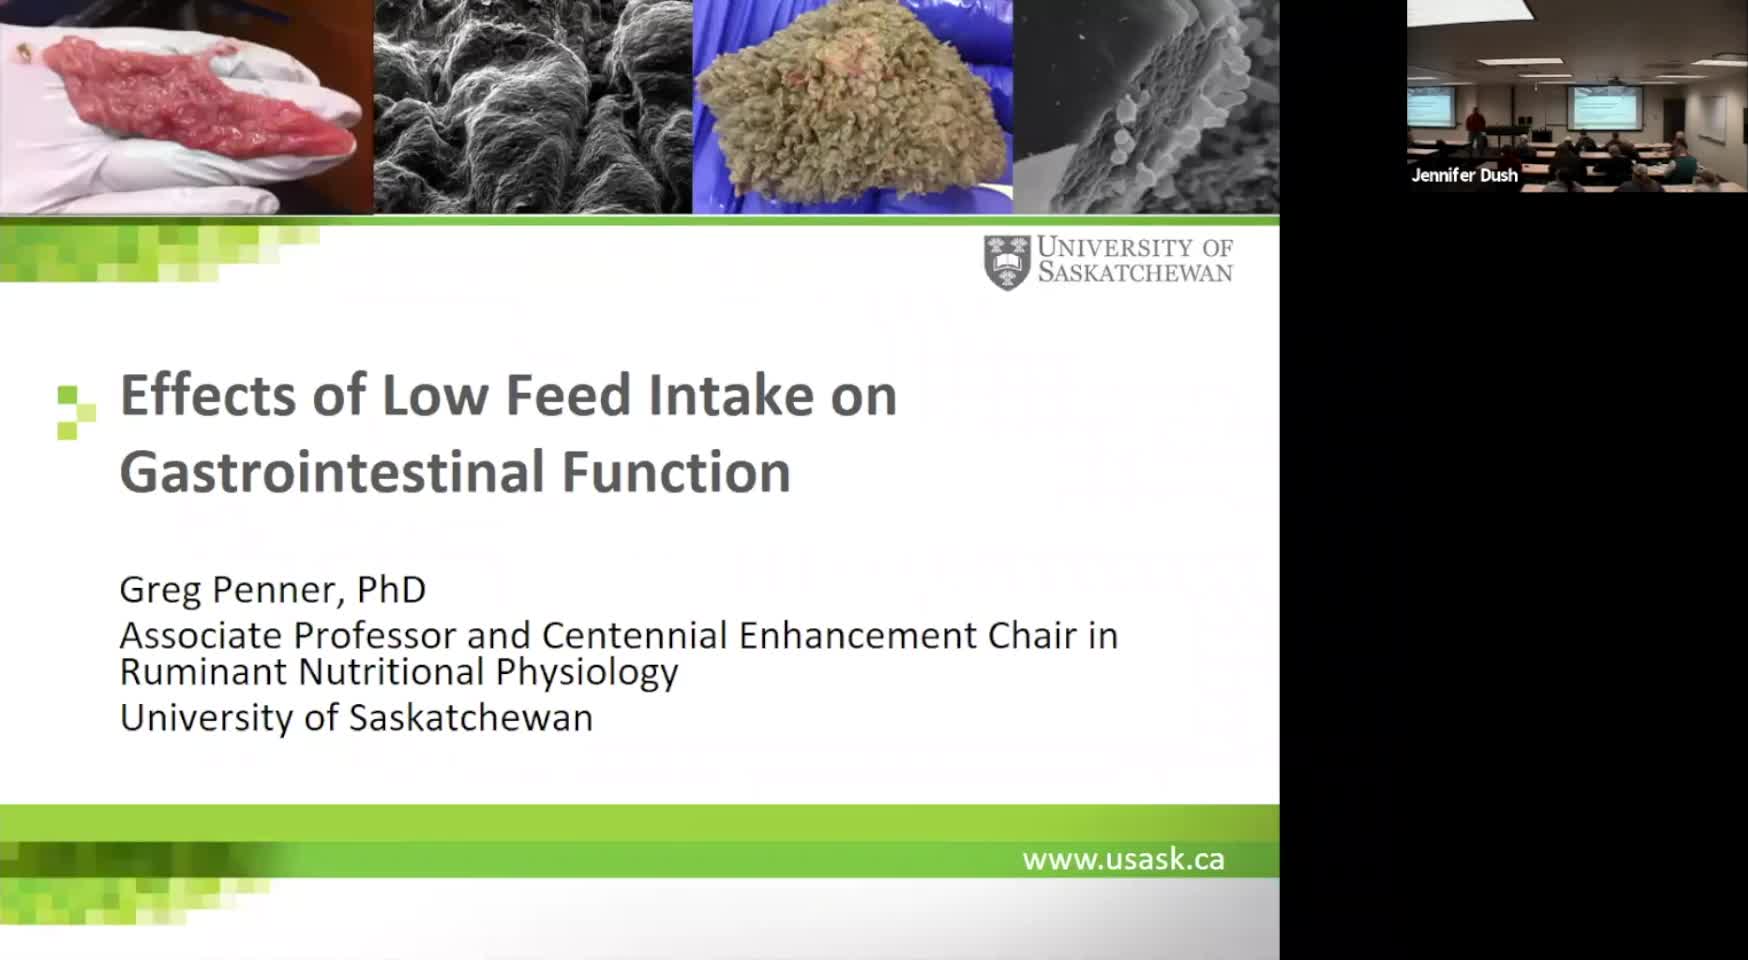 Effects of Low Feed Intake on Gastrointestinal Function